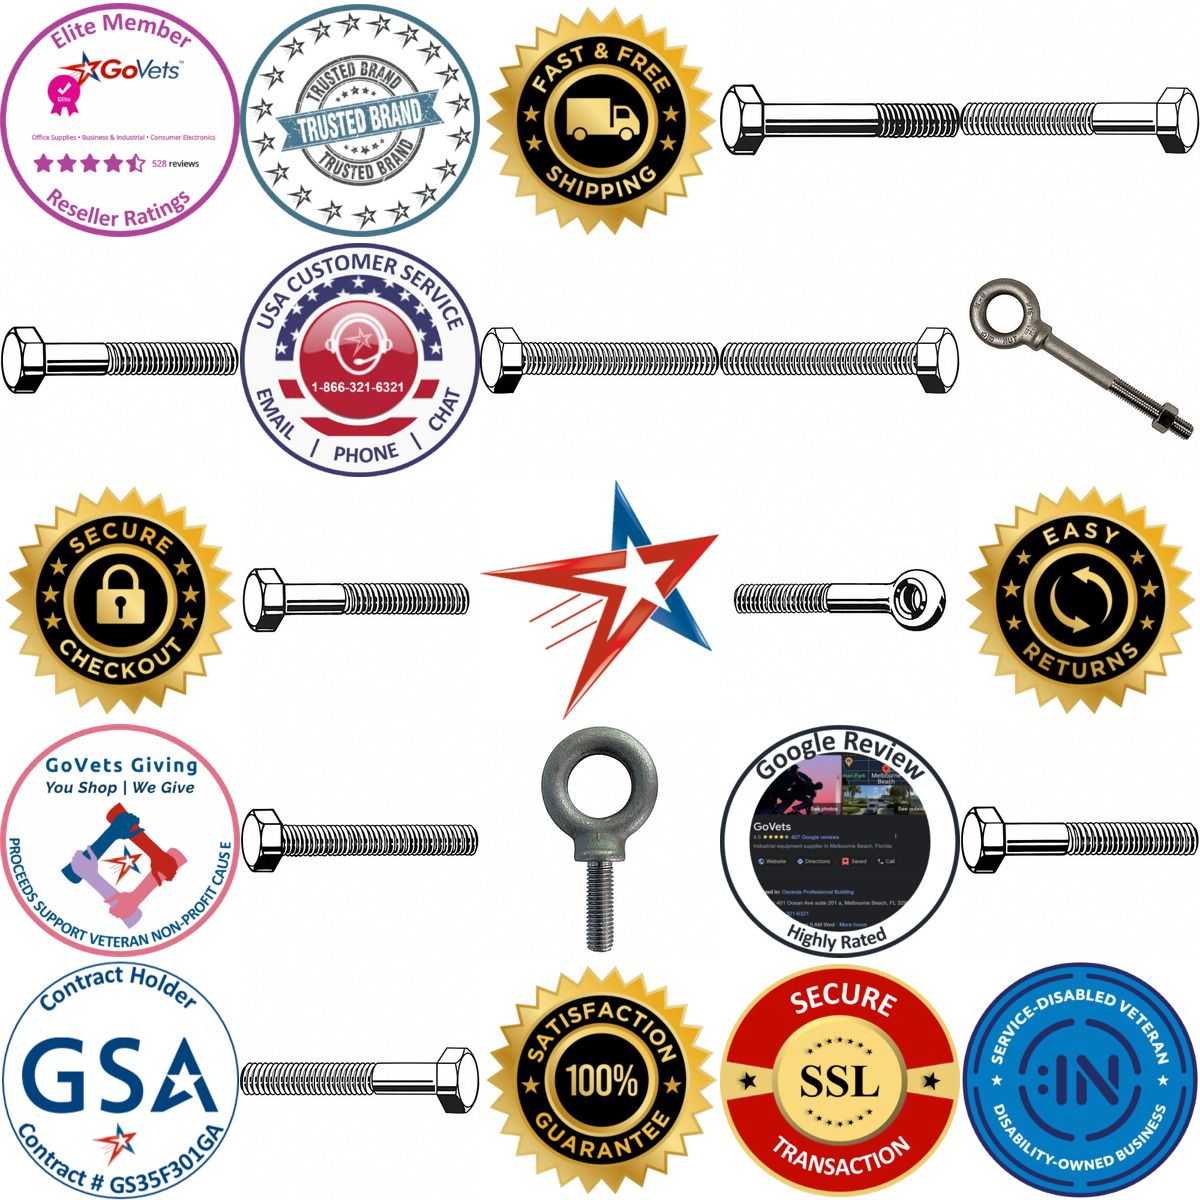 A selection of Bolts products on GoVets